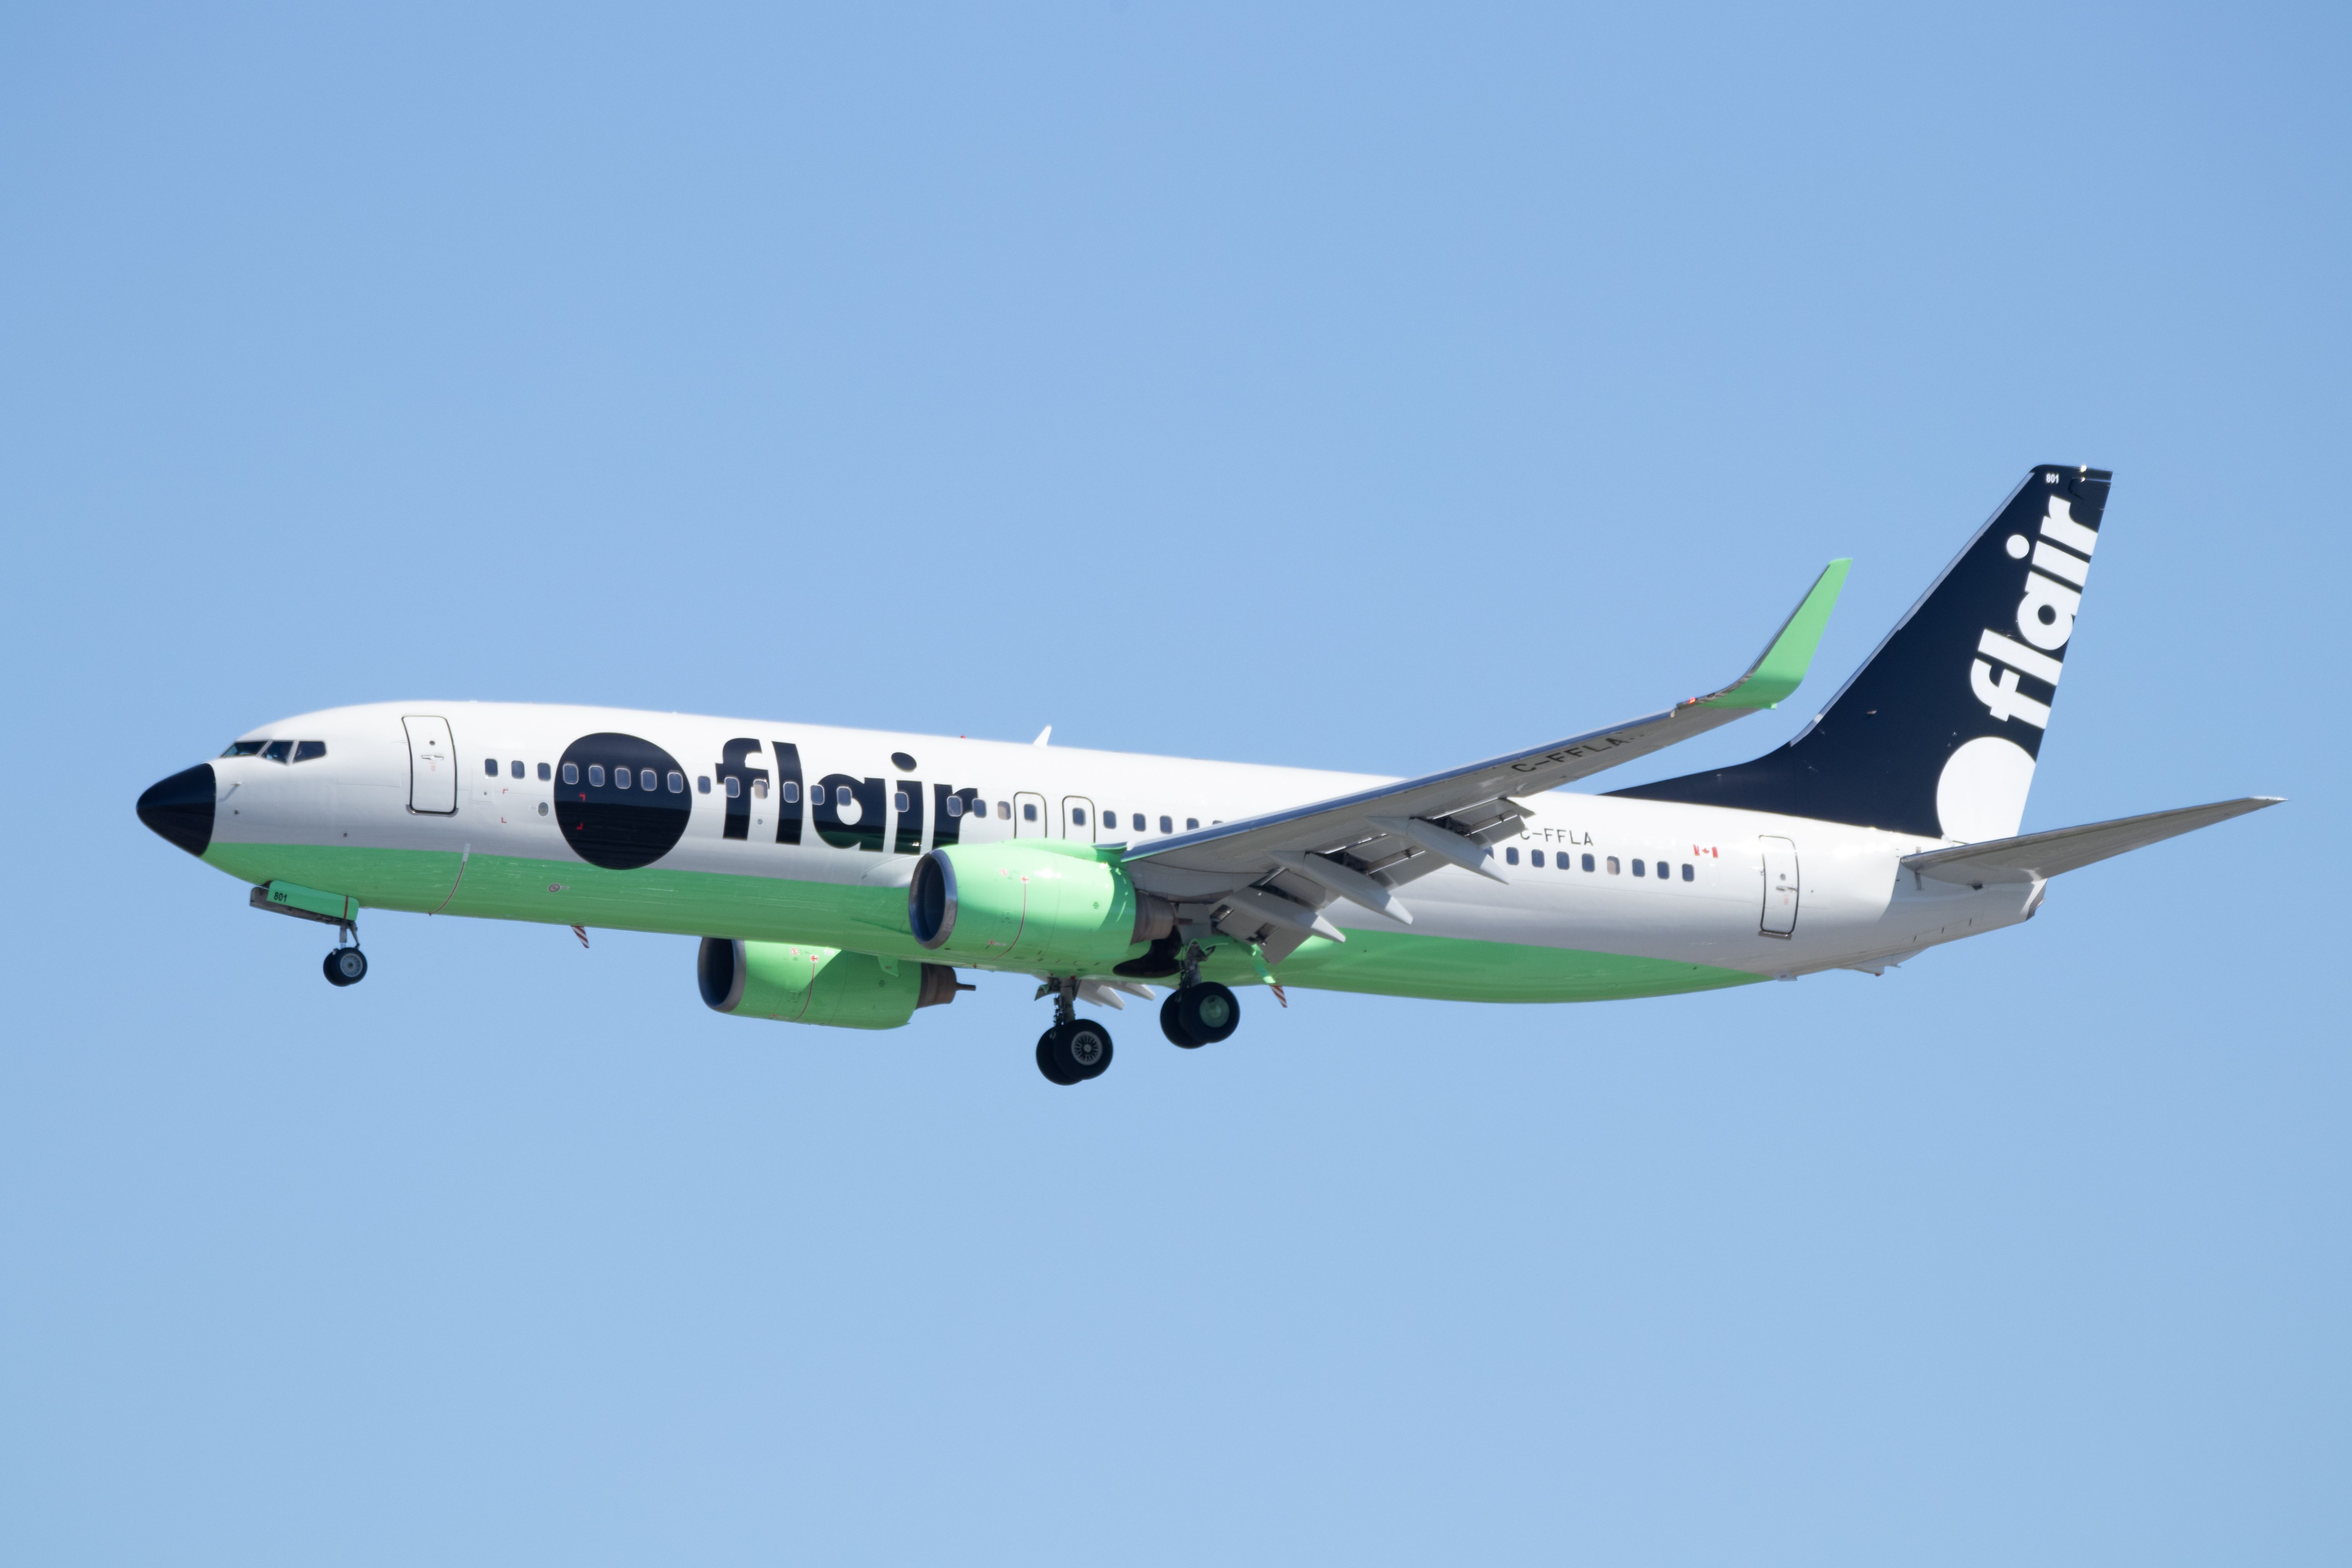 A Flair Airlines Boeing 737-800 